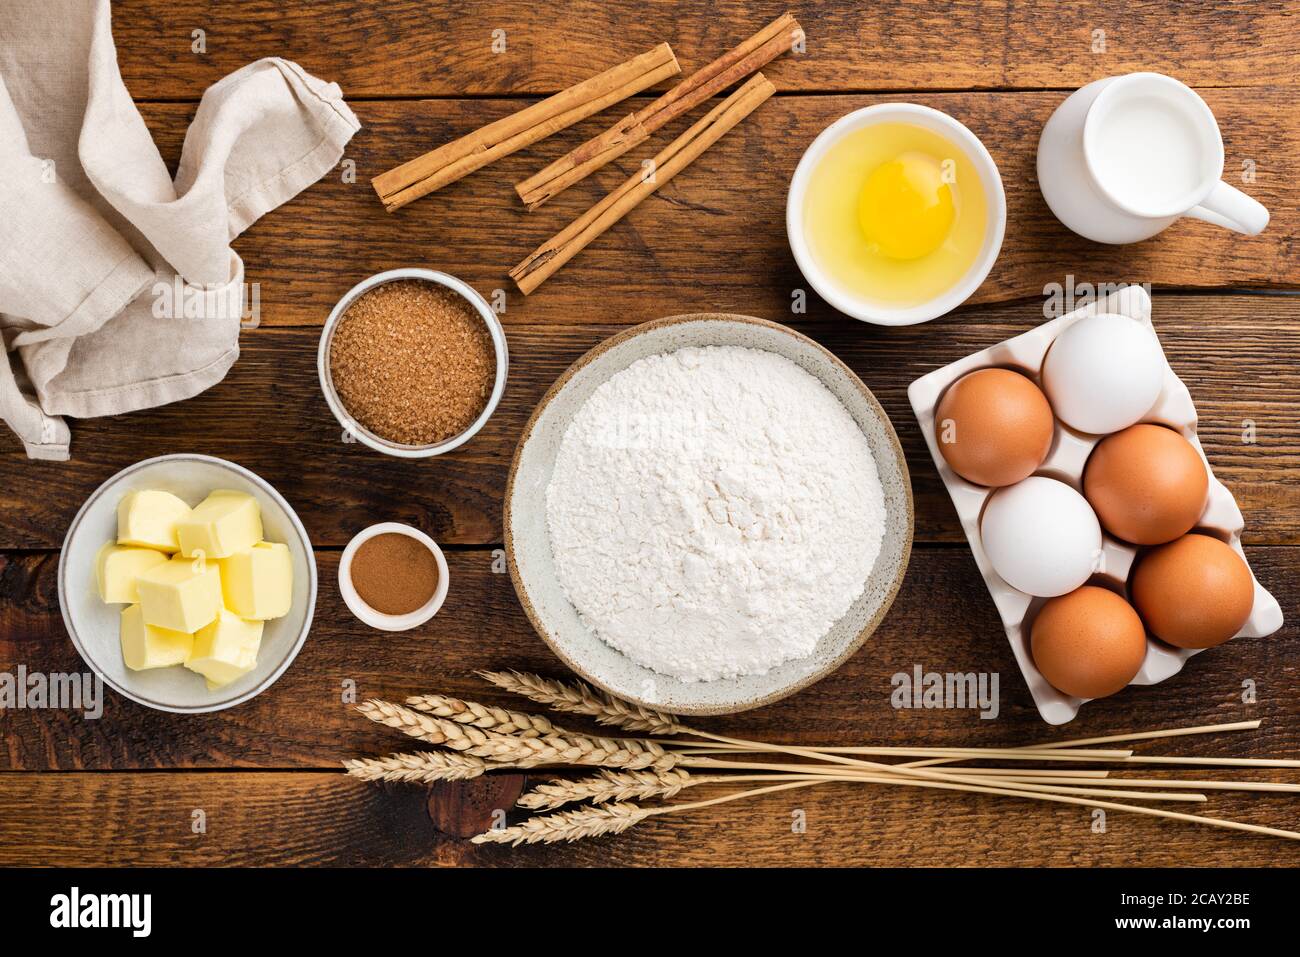 Baking ingredients on a wooden table background. Ingredients for baking a cake, cookies or pastry. Top view. Food background Stock Photo